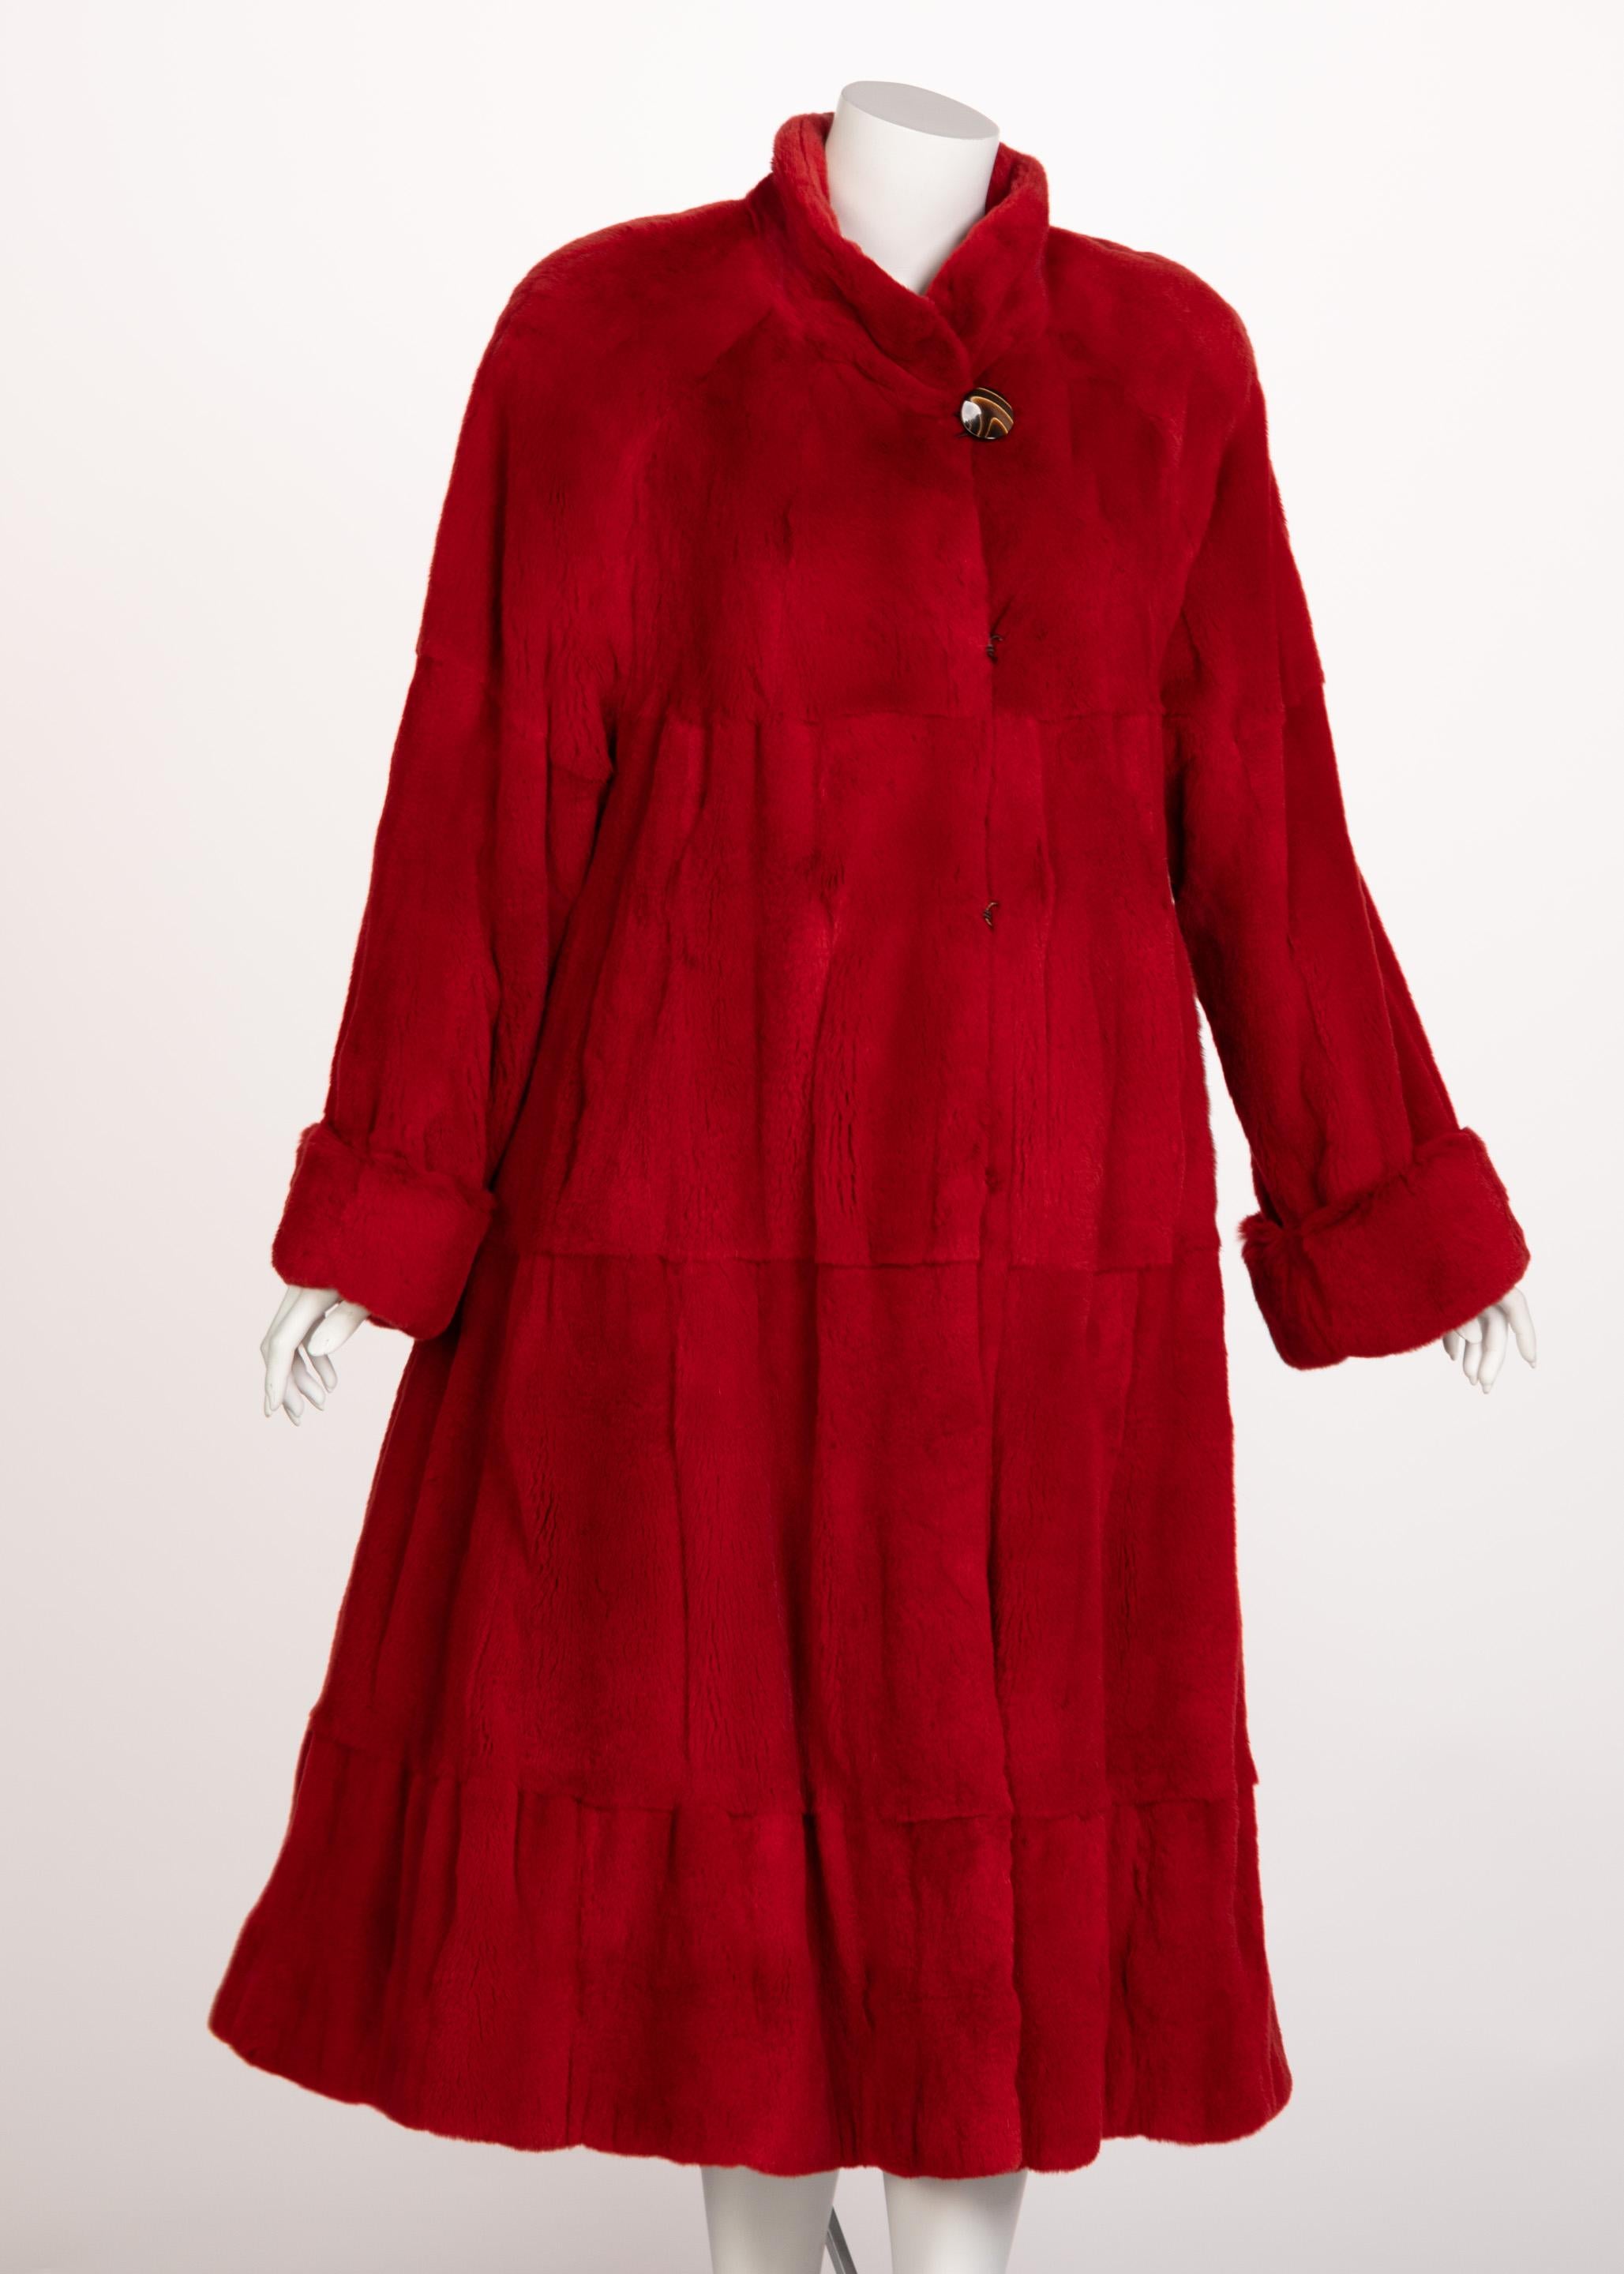 Mink has long since been associated with the luxury and status. A lush and lustrous fur, mink coats have for many years been an endearing treasure for winter style. This coat made from a vibrant red mink, possibly from the 80s or 90s, and is done in